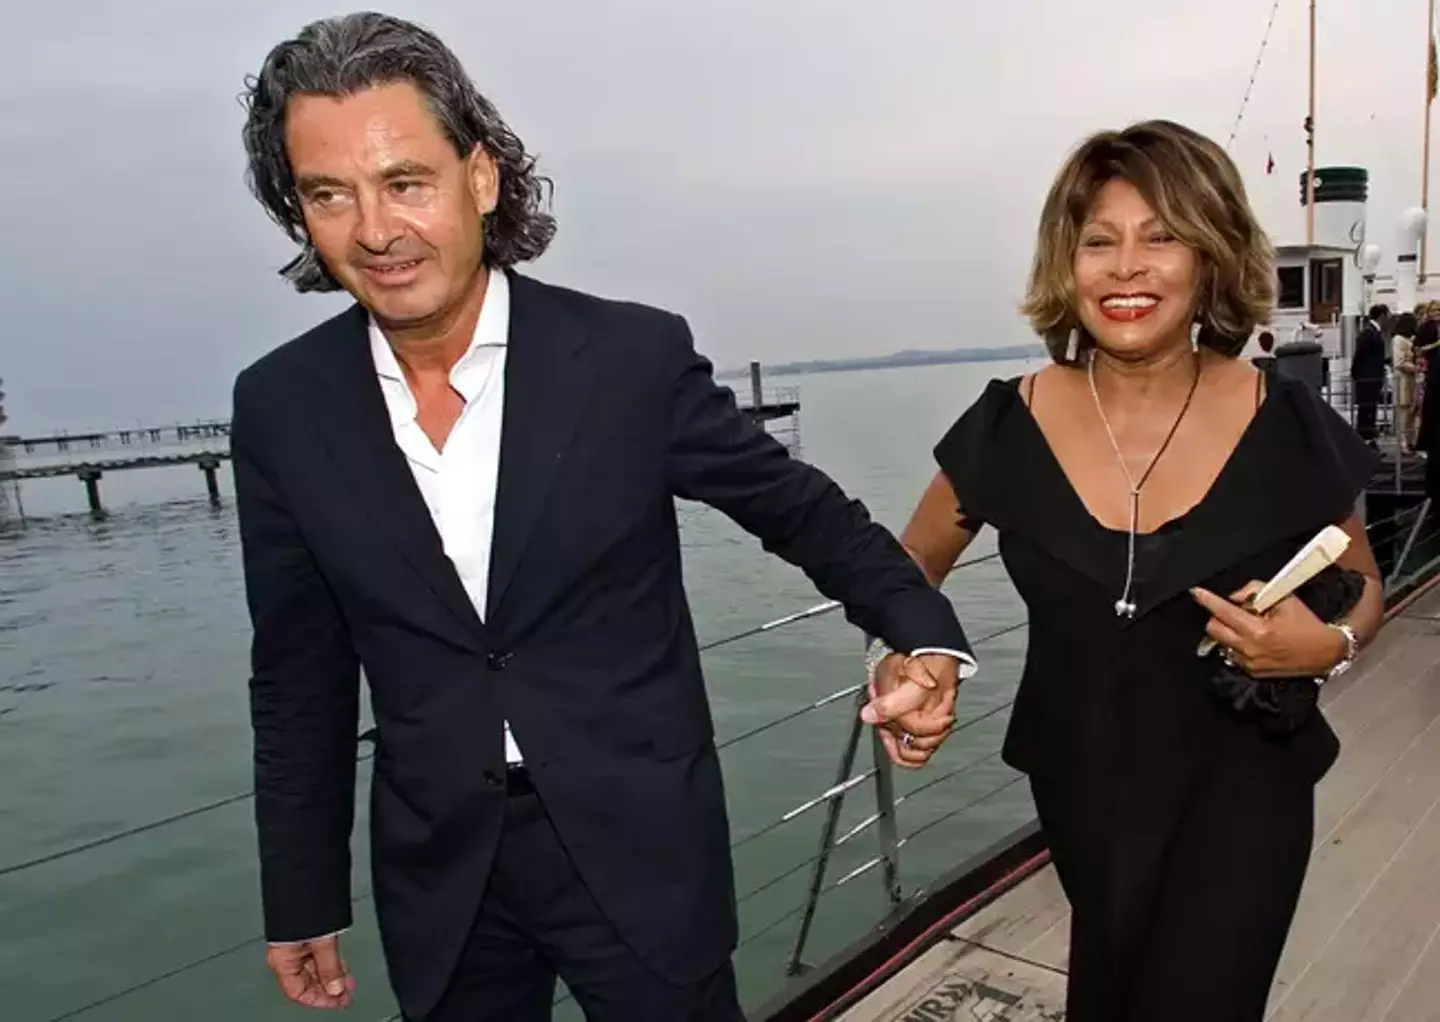 Tina Turner and Erwin Bach were together for 37 years.